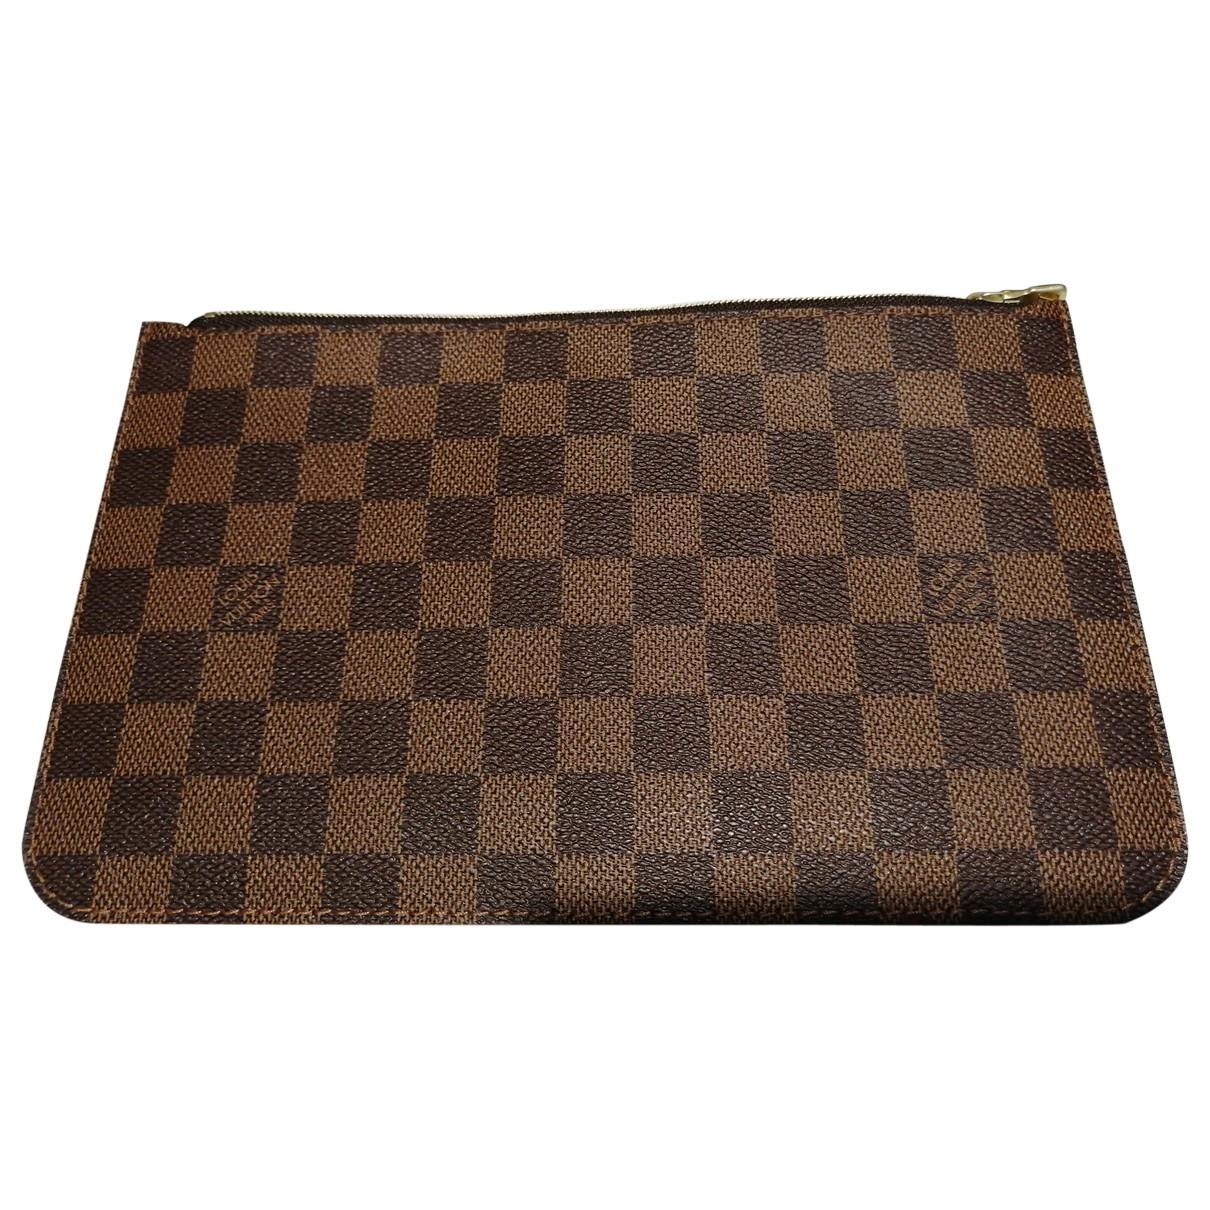 Lyst - Louis Vuitton Neverfull Brown Cloth Clutch Bag in Brown